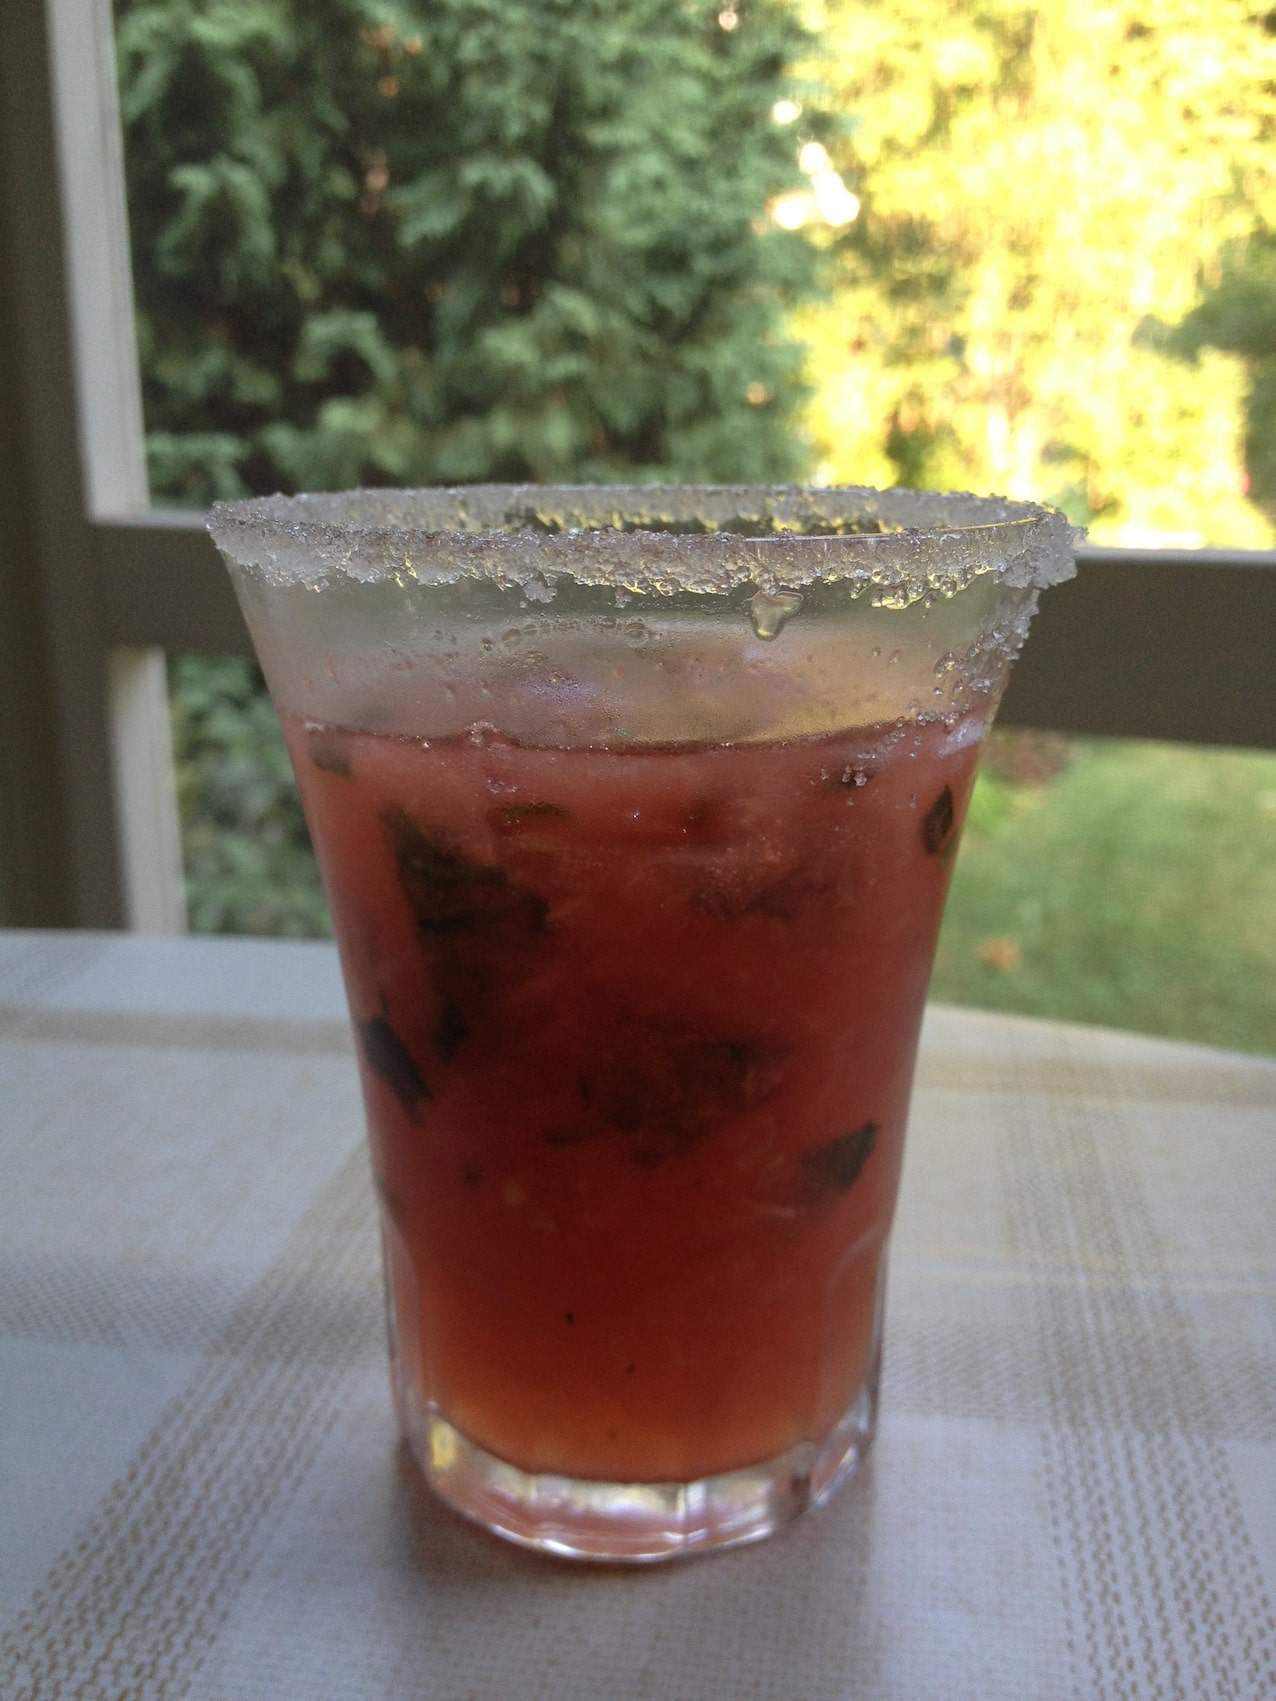 We didn't have the patience to allow the ‘Watermelon Slush’ to freeze as recommended, but the resulting ‘Watermelon Mojito’ still tasted delicious.